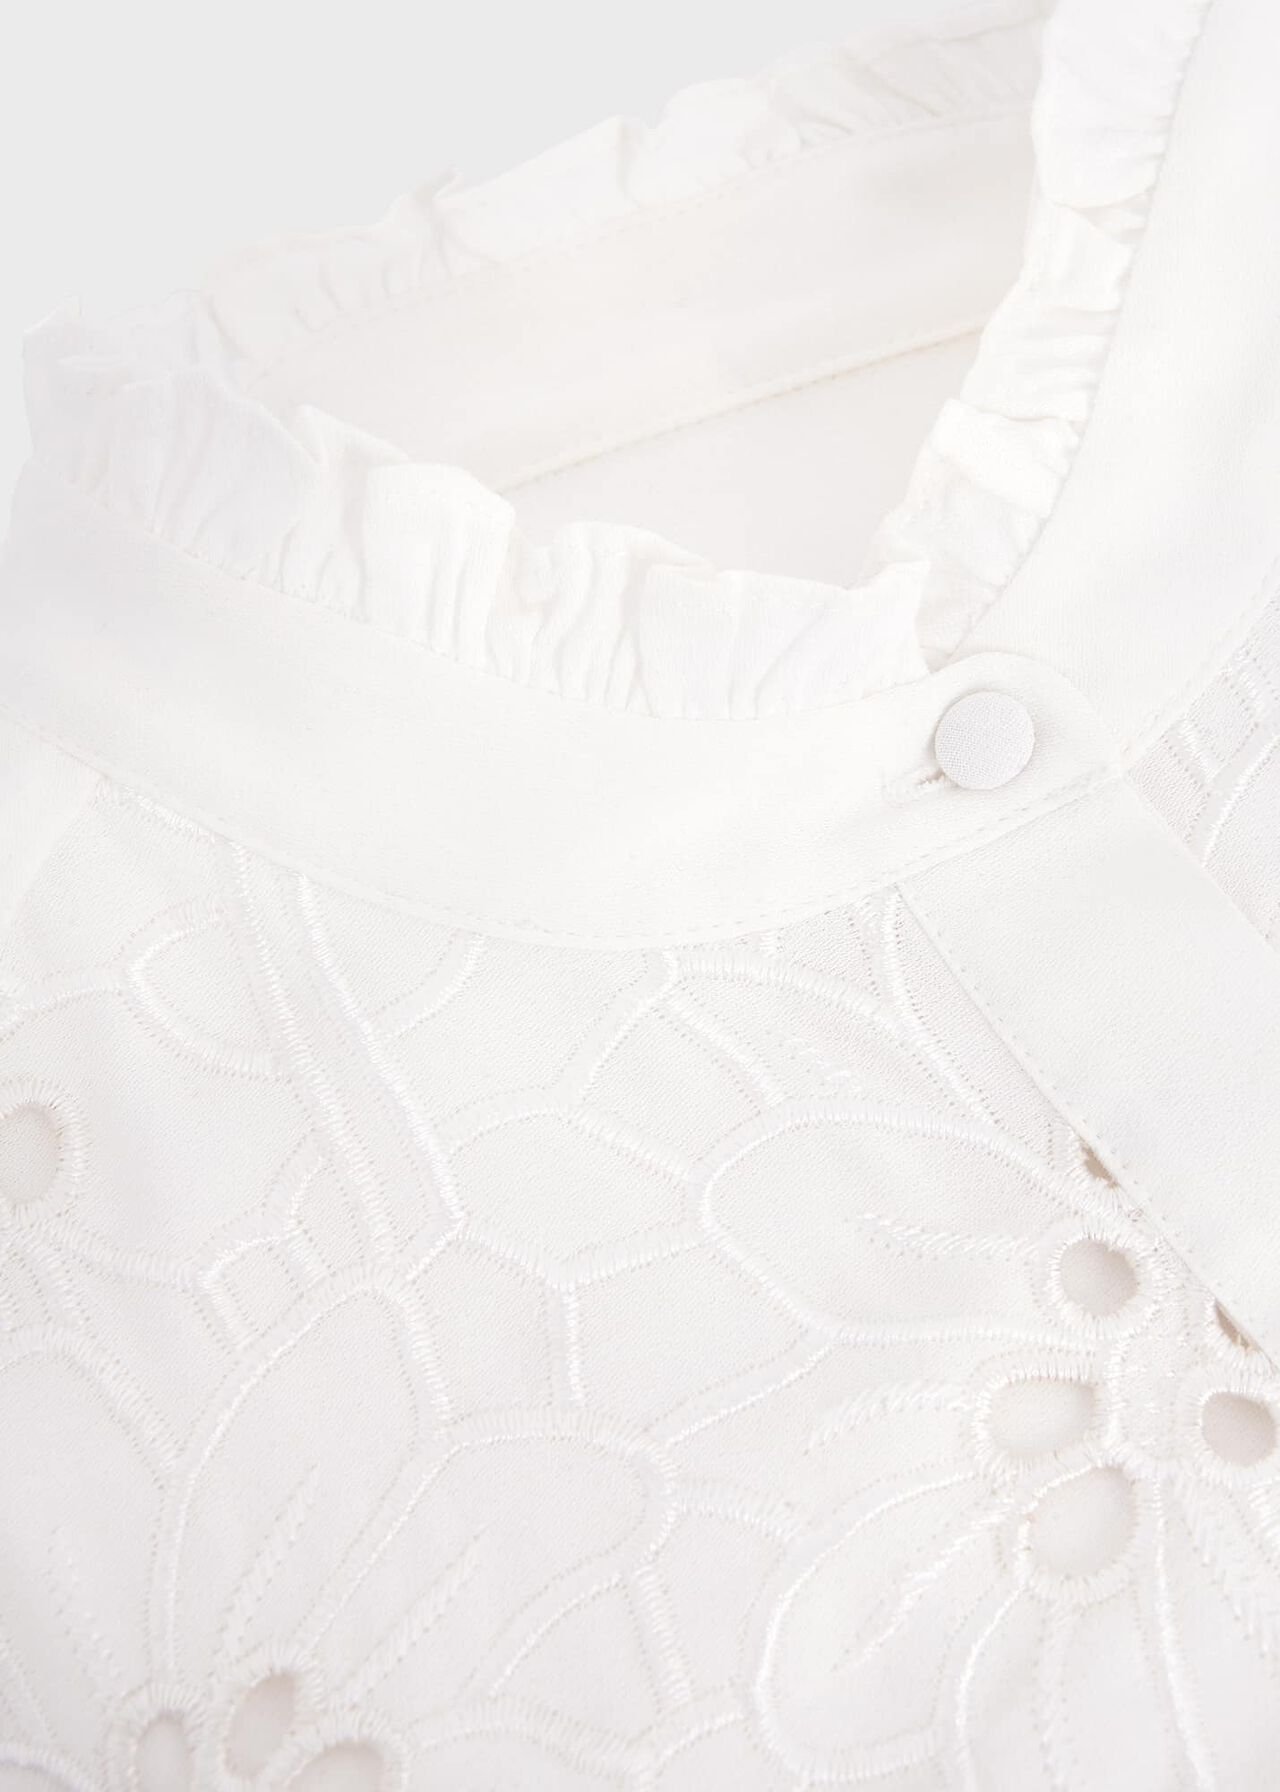 Ada Embroidered Top, Ivory, hi-res